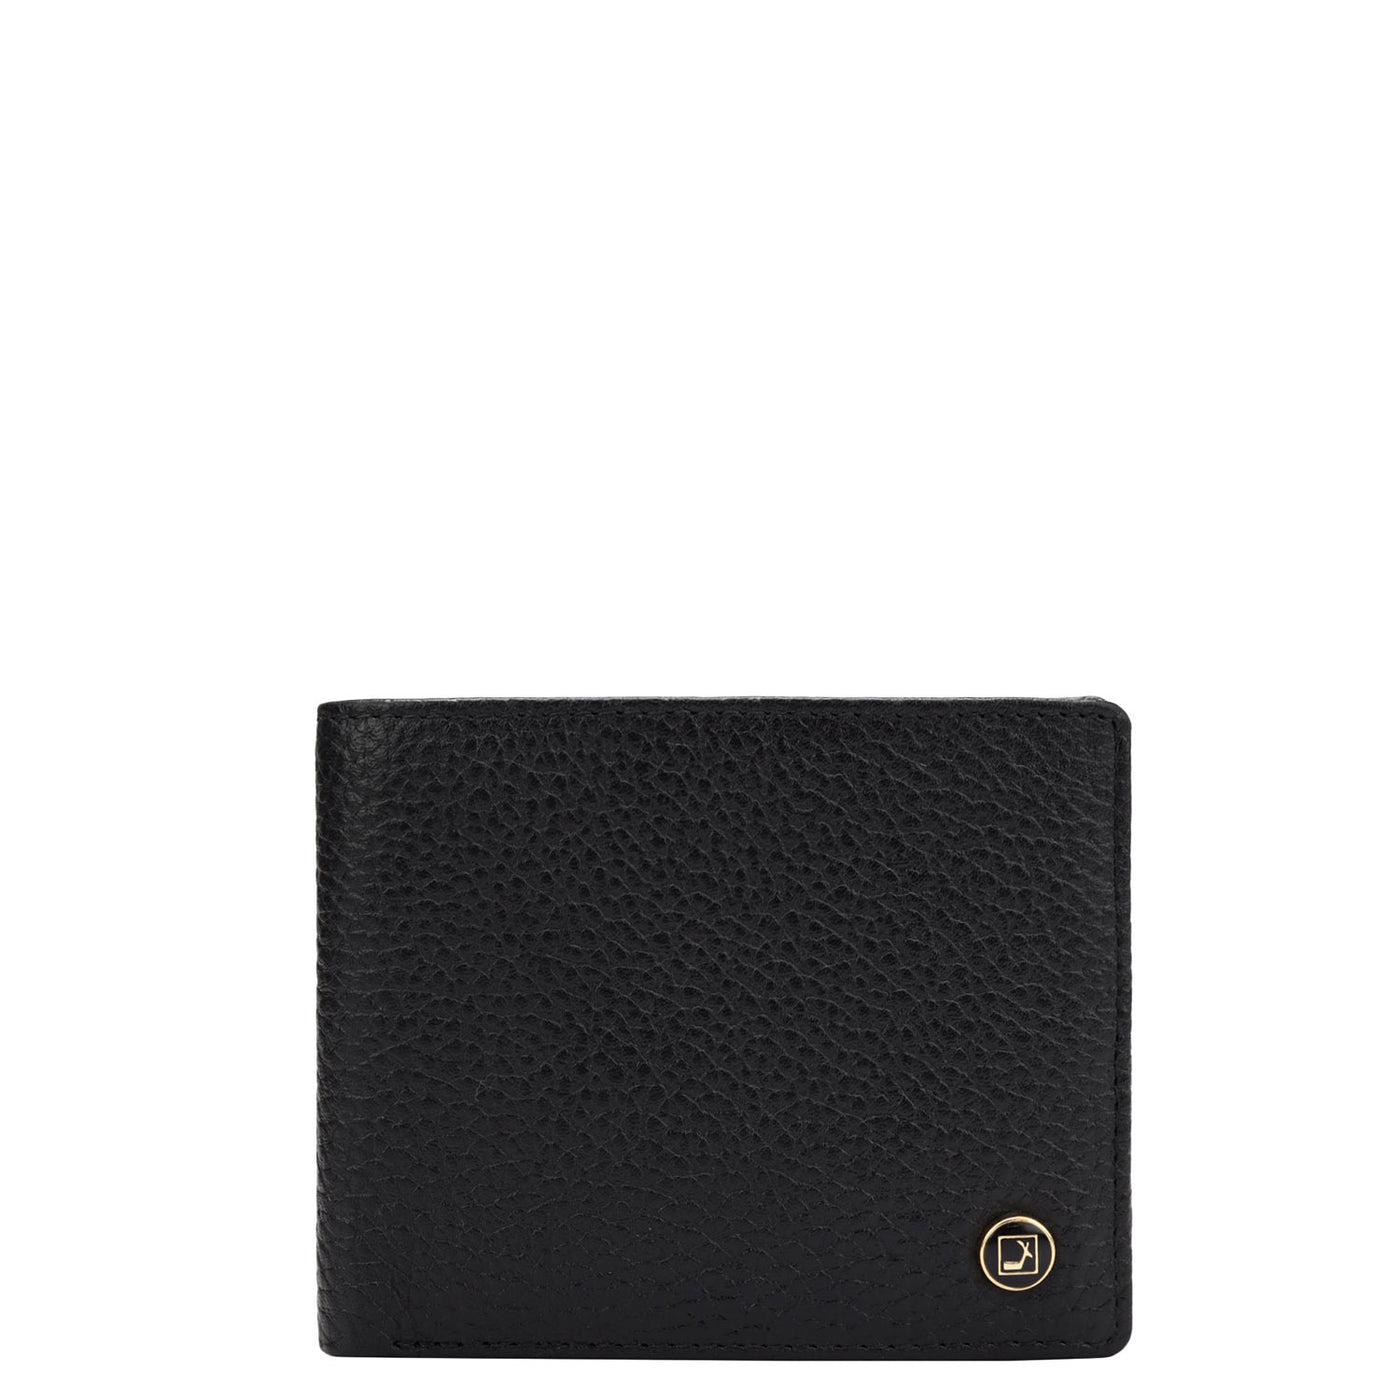 Wax Leather Mens Wallet - Black